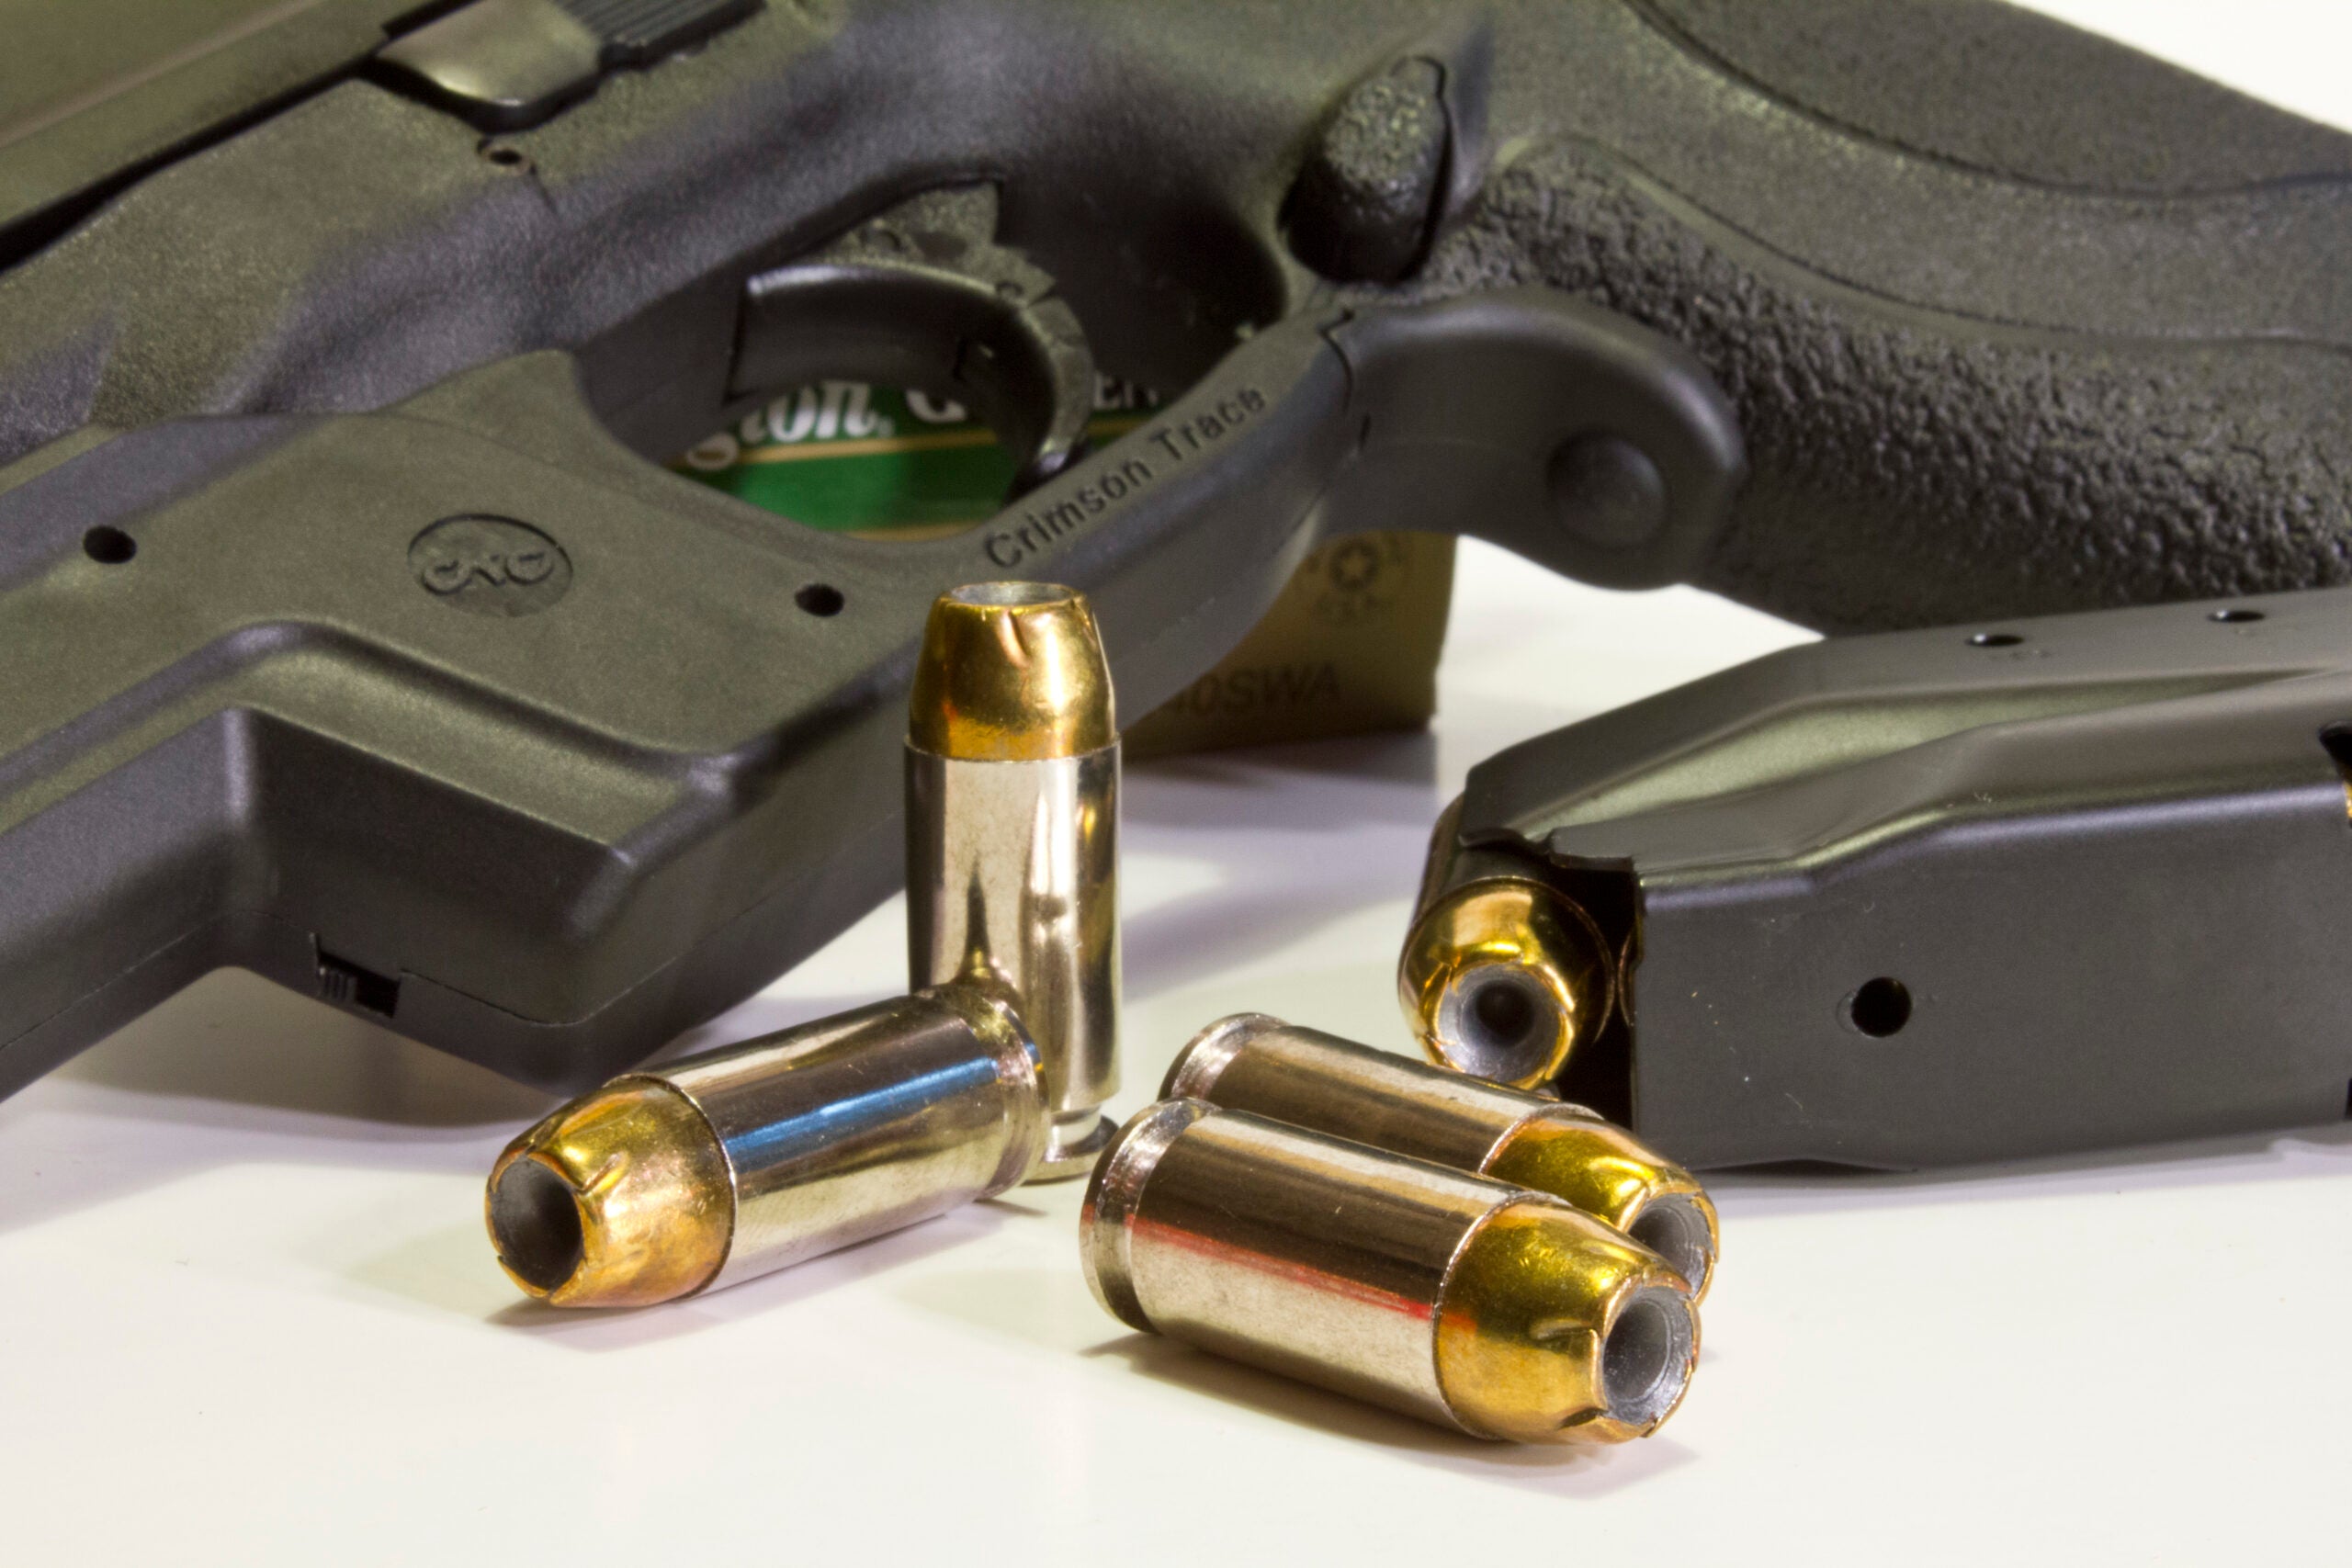 40 S&W cartridge lying near a pistol and magazine on white background